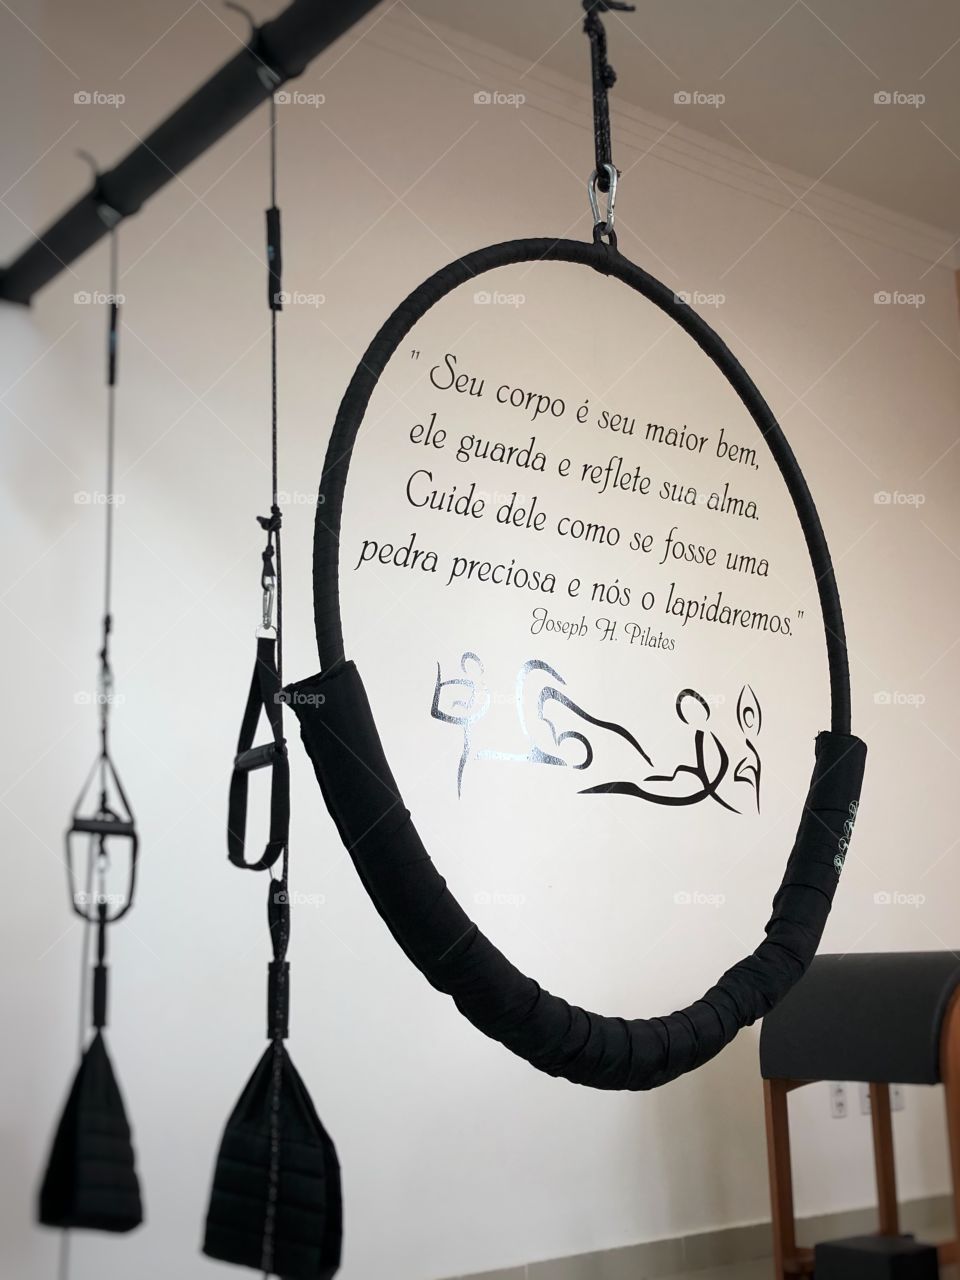 Pilates equipment... “Your body is your most priceless possession; you've go to take care of it as s gemstone and we will carve it”, by Joseph Pilates. Pilates: a great way to stay fit - body and mind.